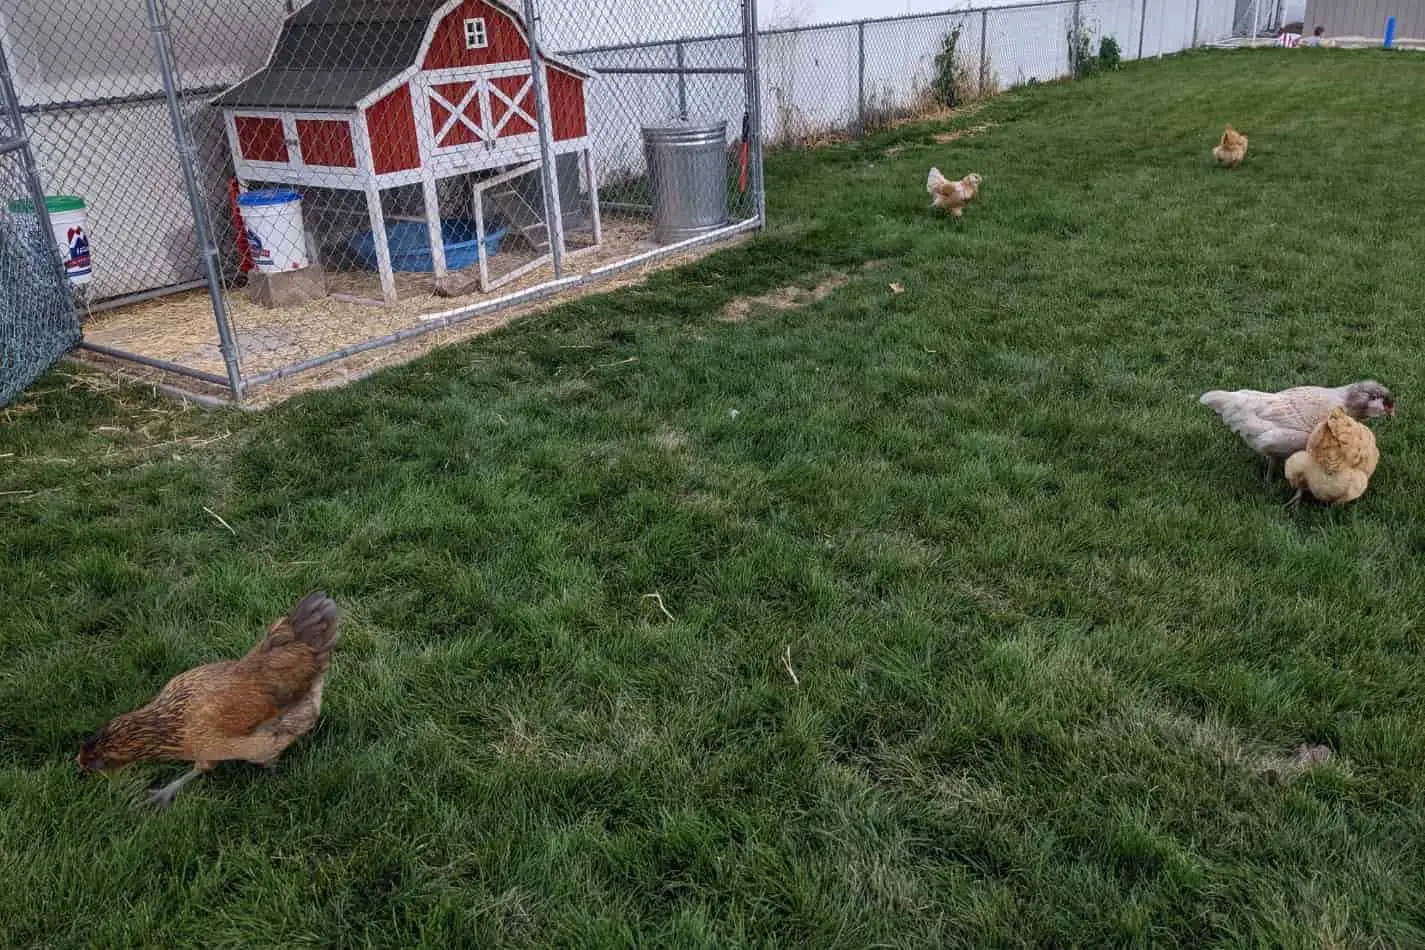 An image of Starr's chickens in a coop run and pasture while free-ranging.